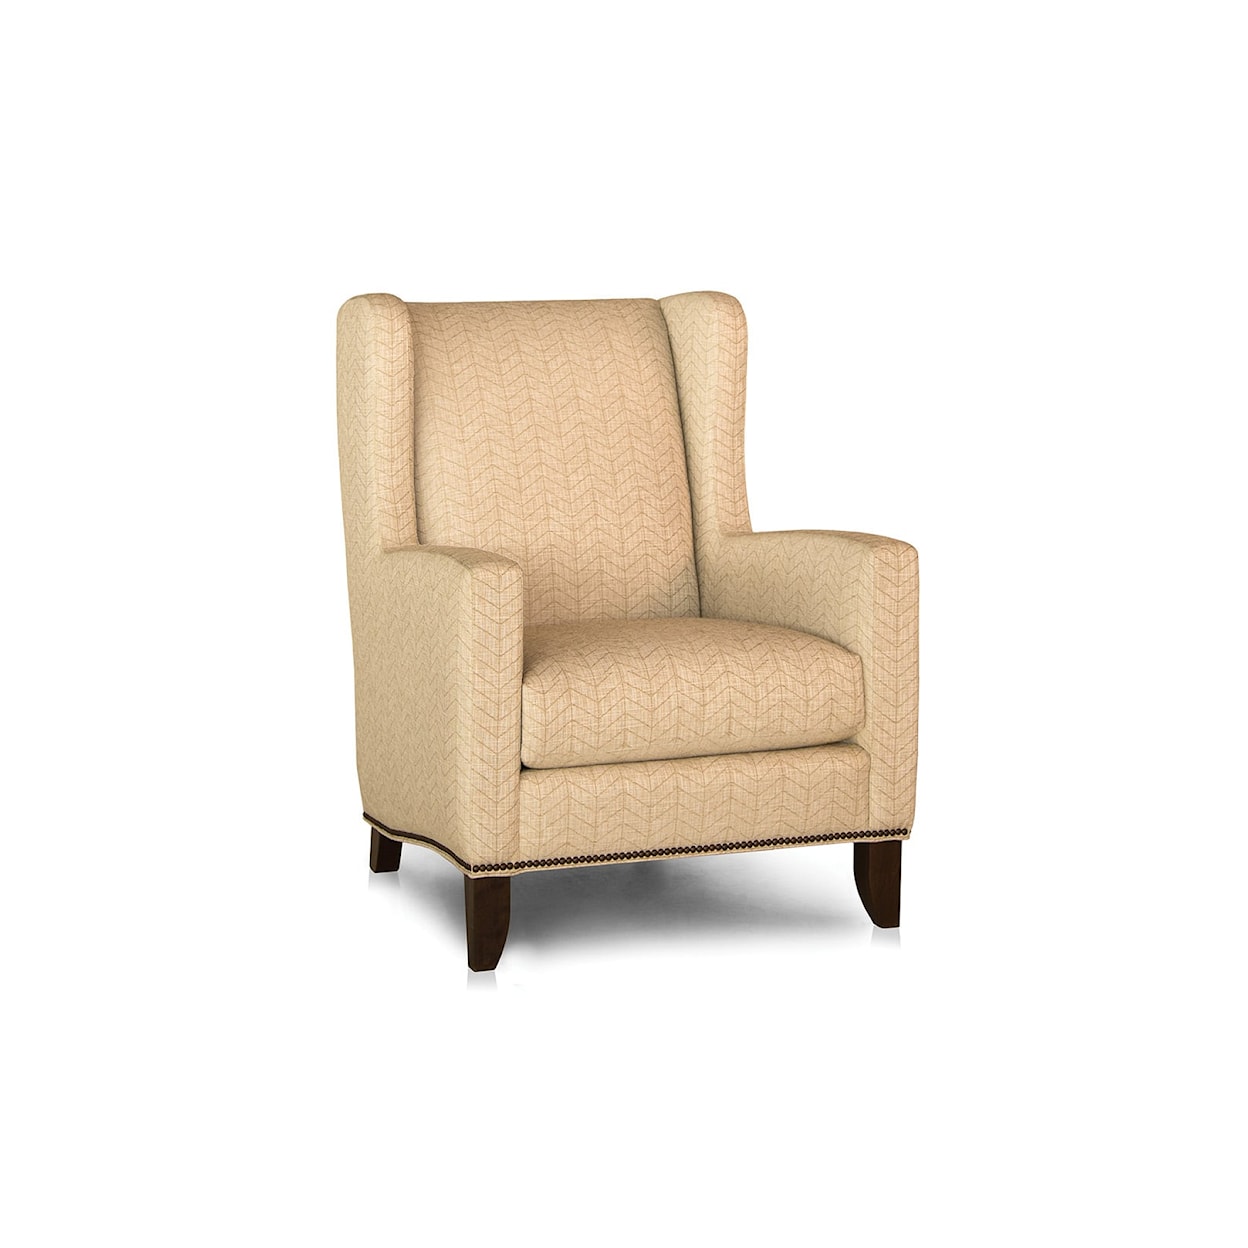 Smith Brothers 538 Wing Back Chair